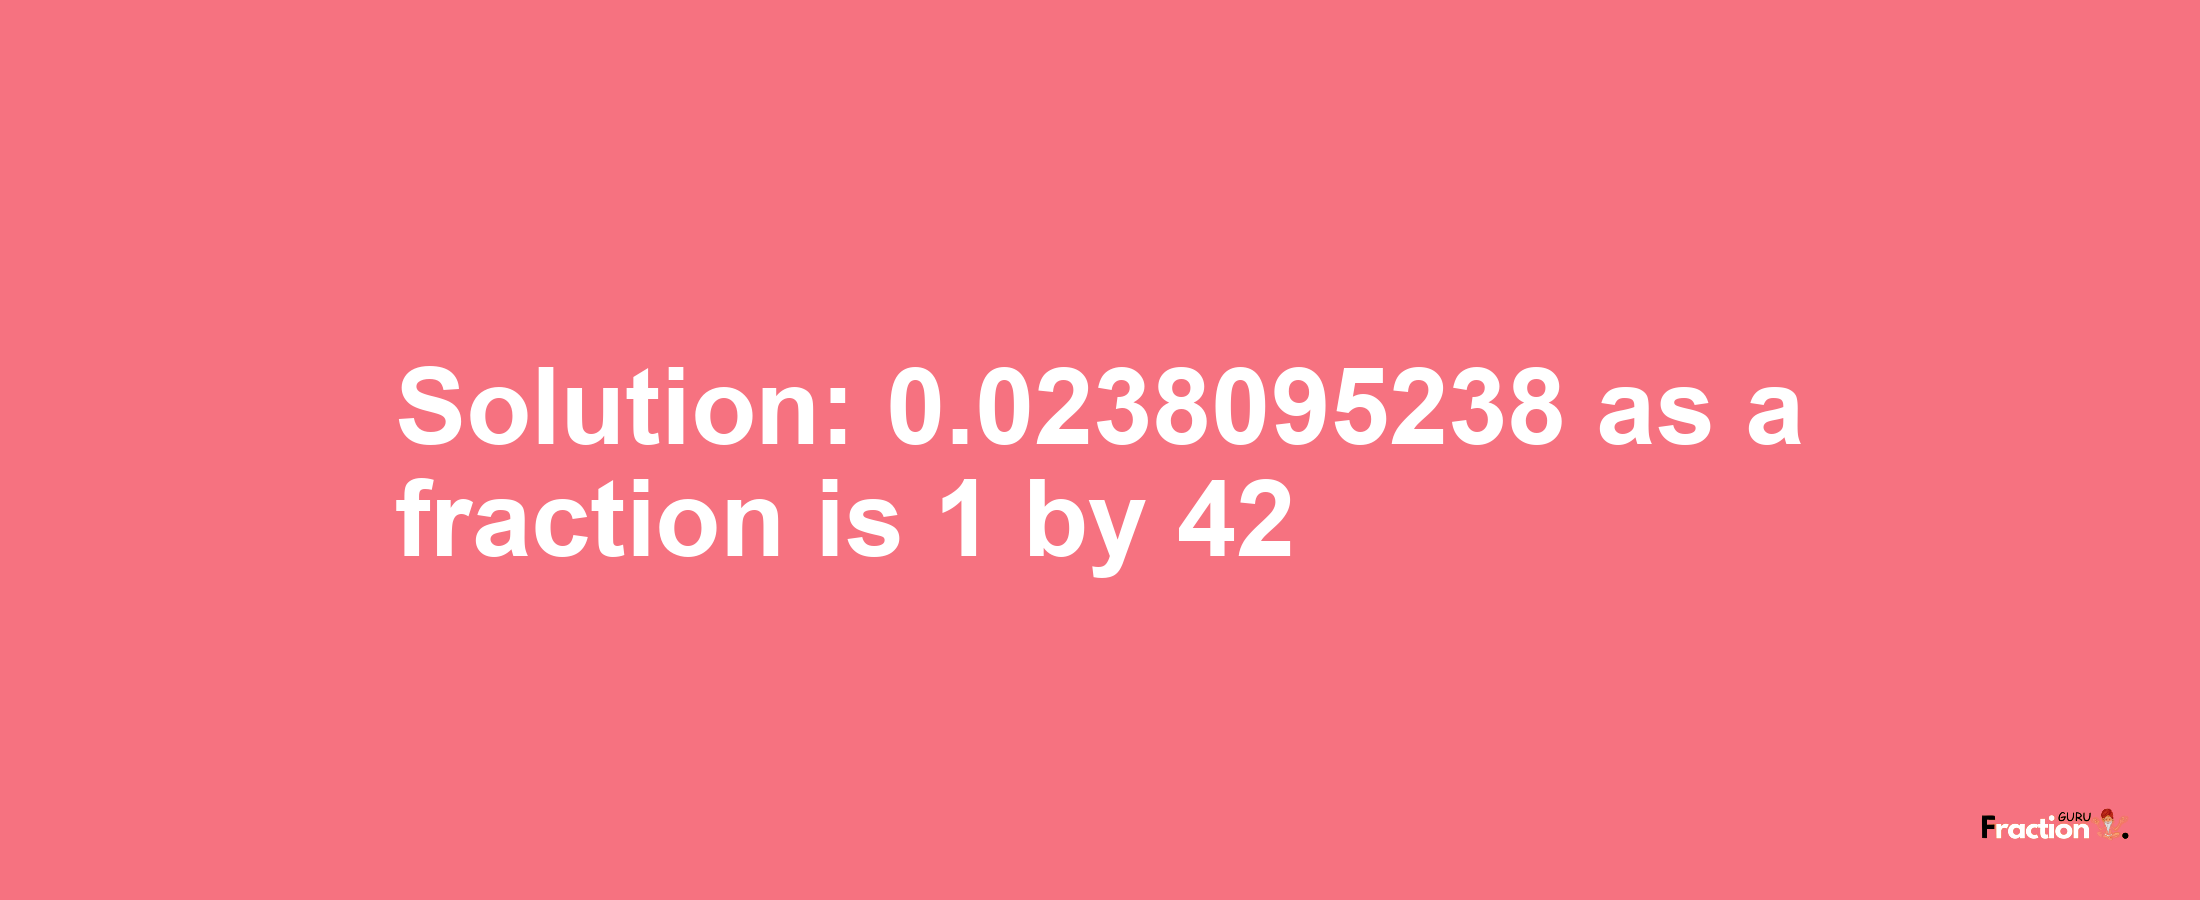 Solution:0.0238095238 as a fraction is 1/42